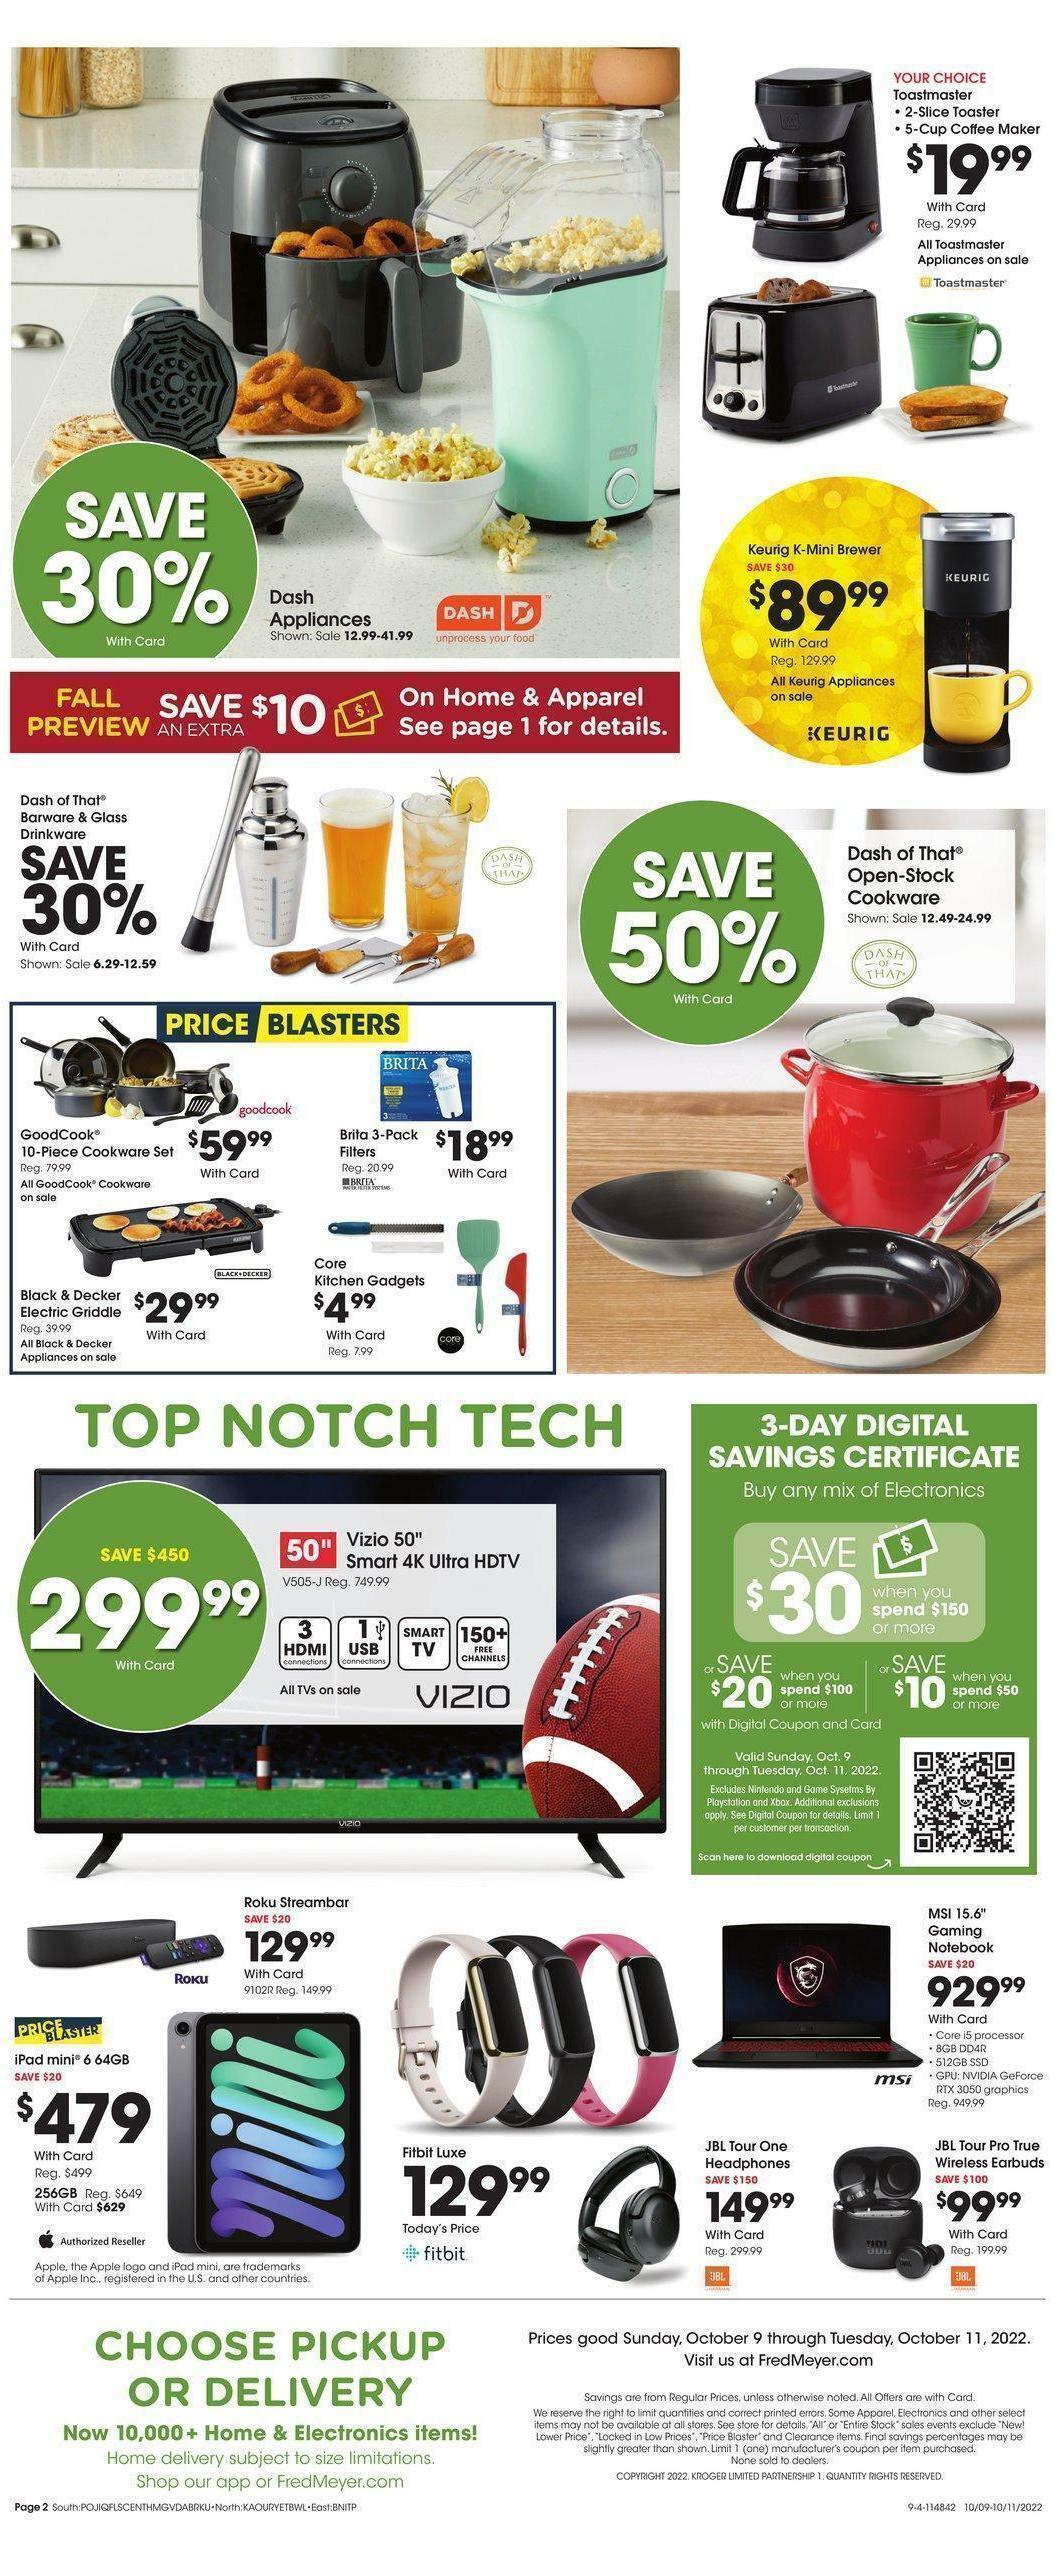 Fred Meyer 3-Day Sale Weekly Ad from October 9